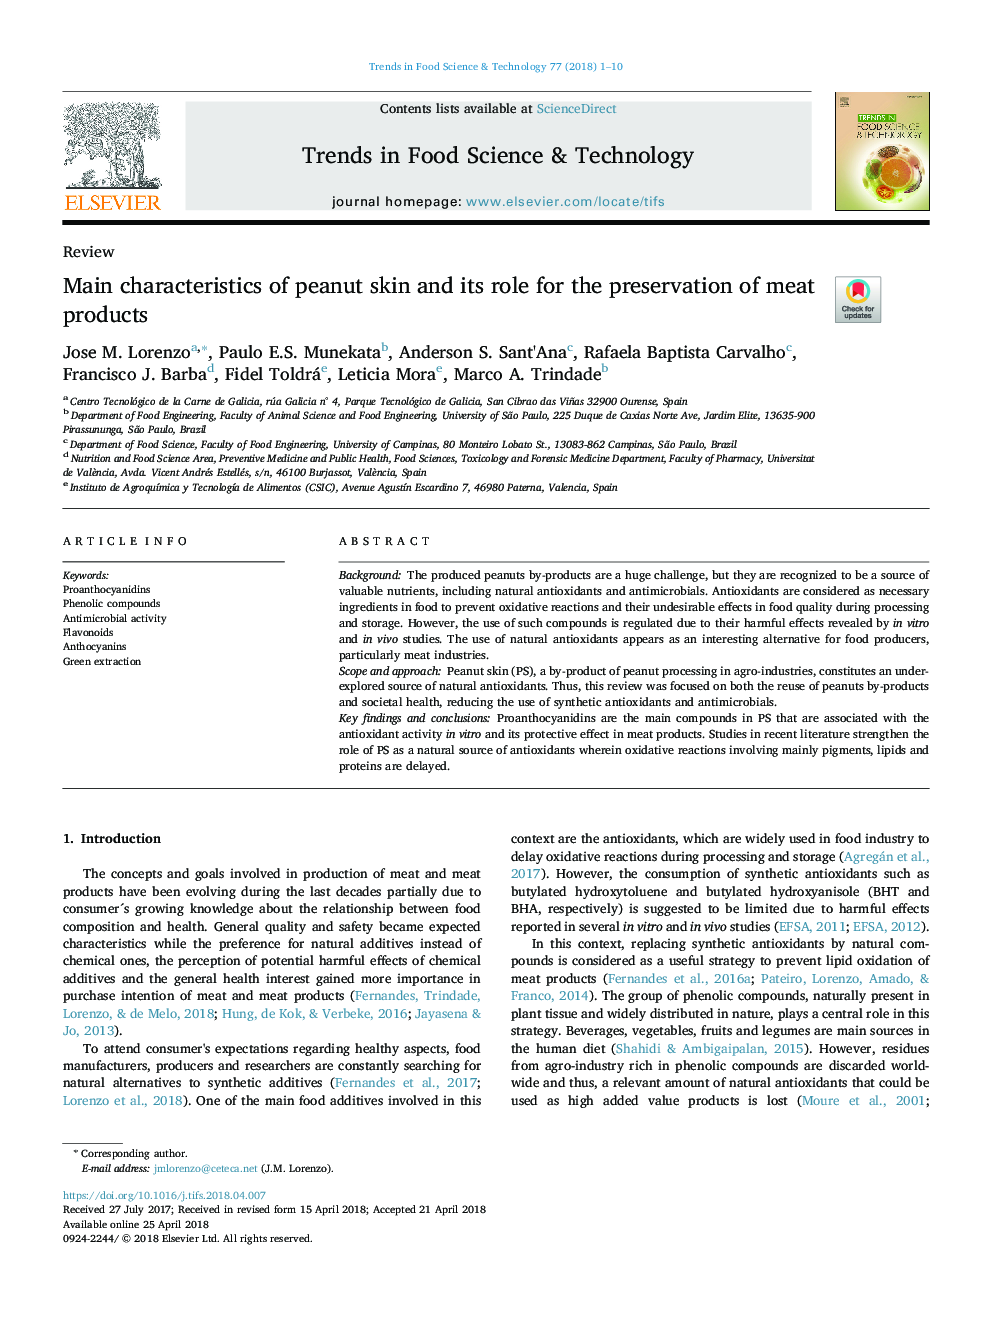 Main characteristics of peanut skin and its role for the preservation of meat products